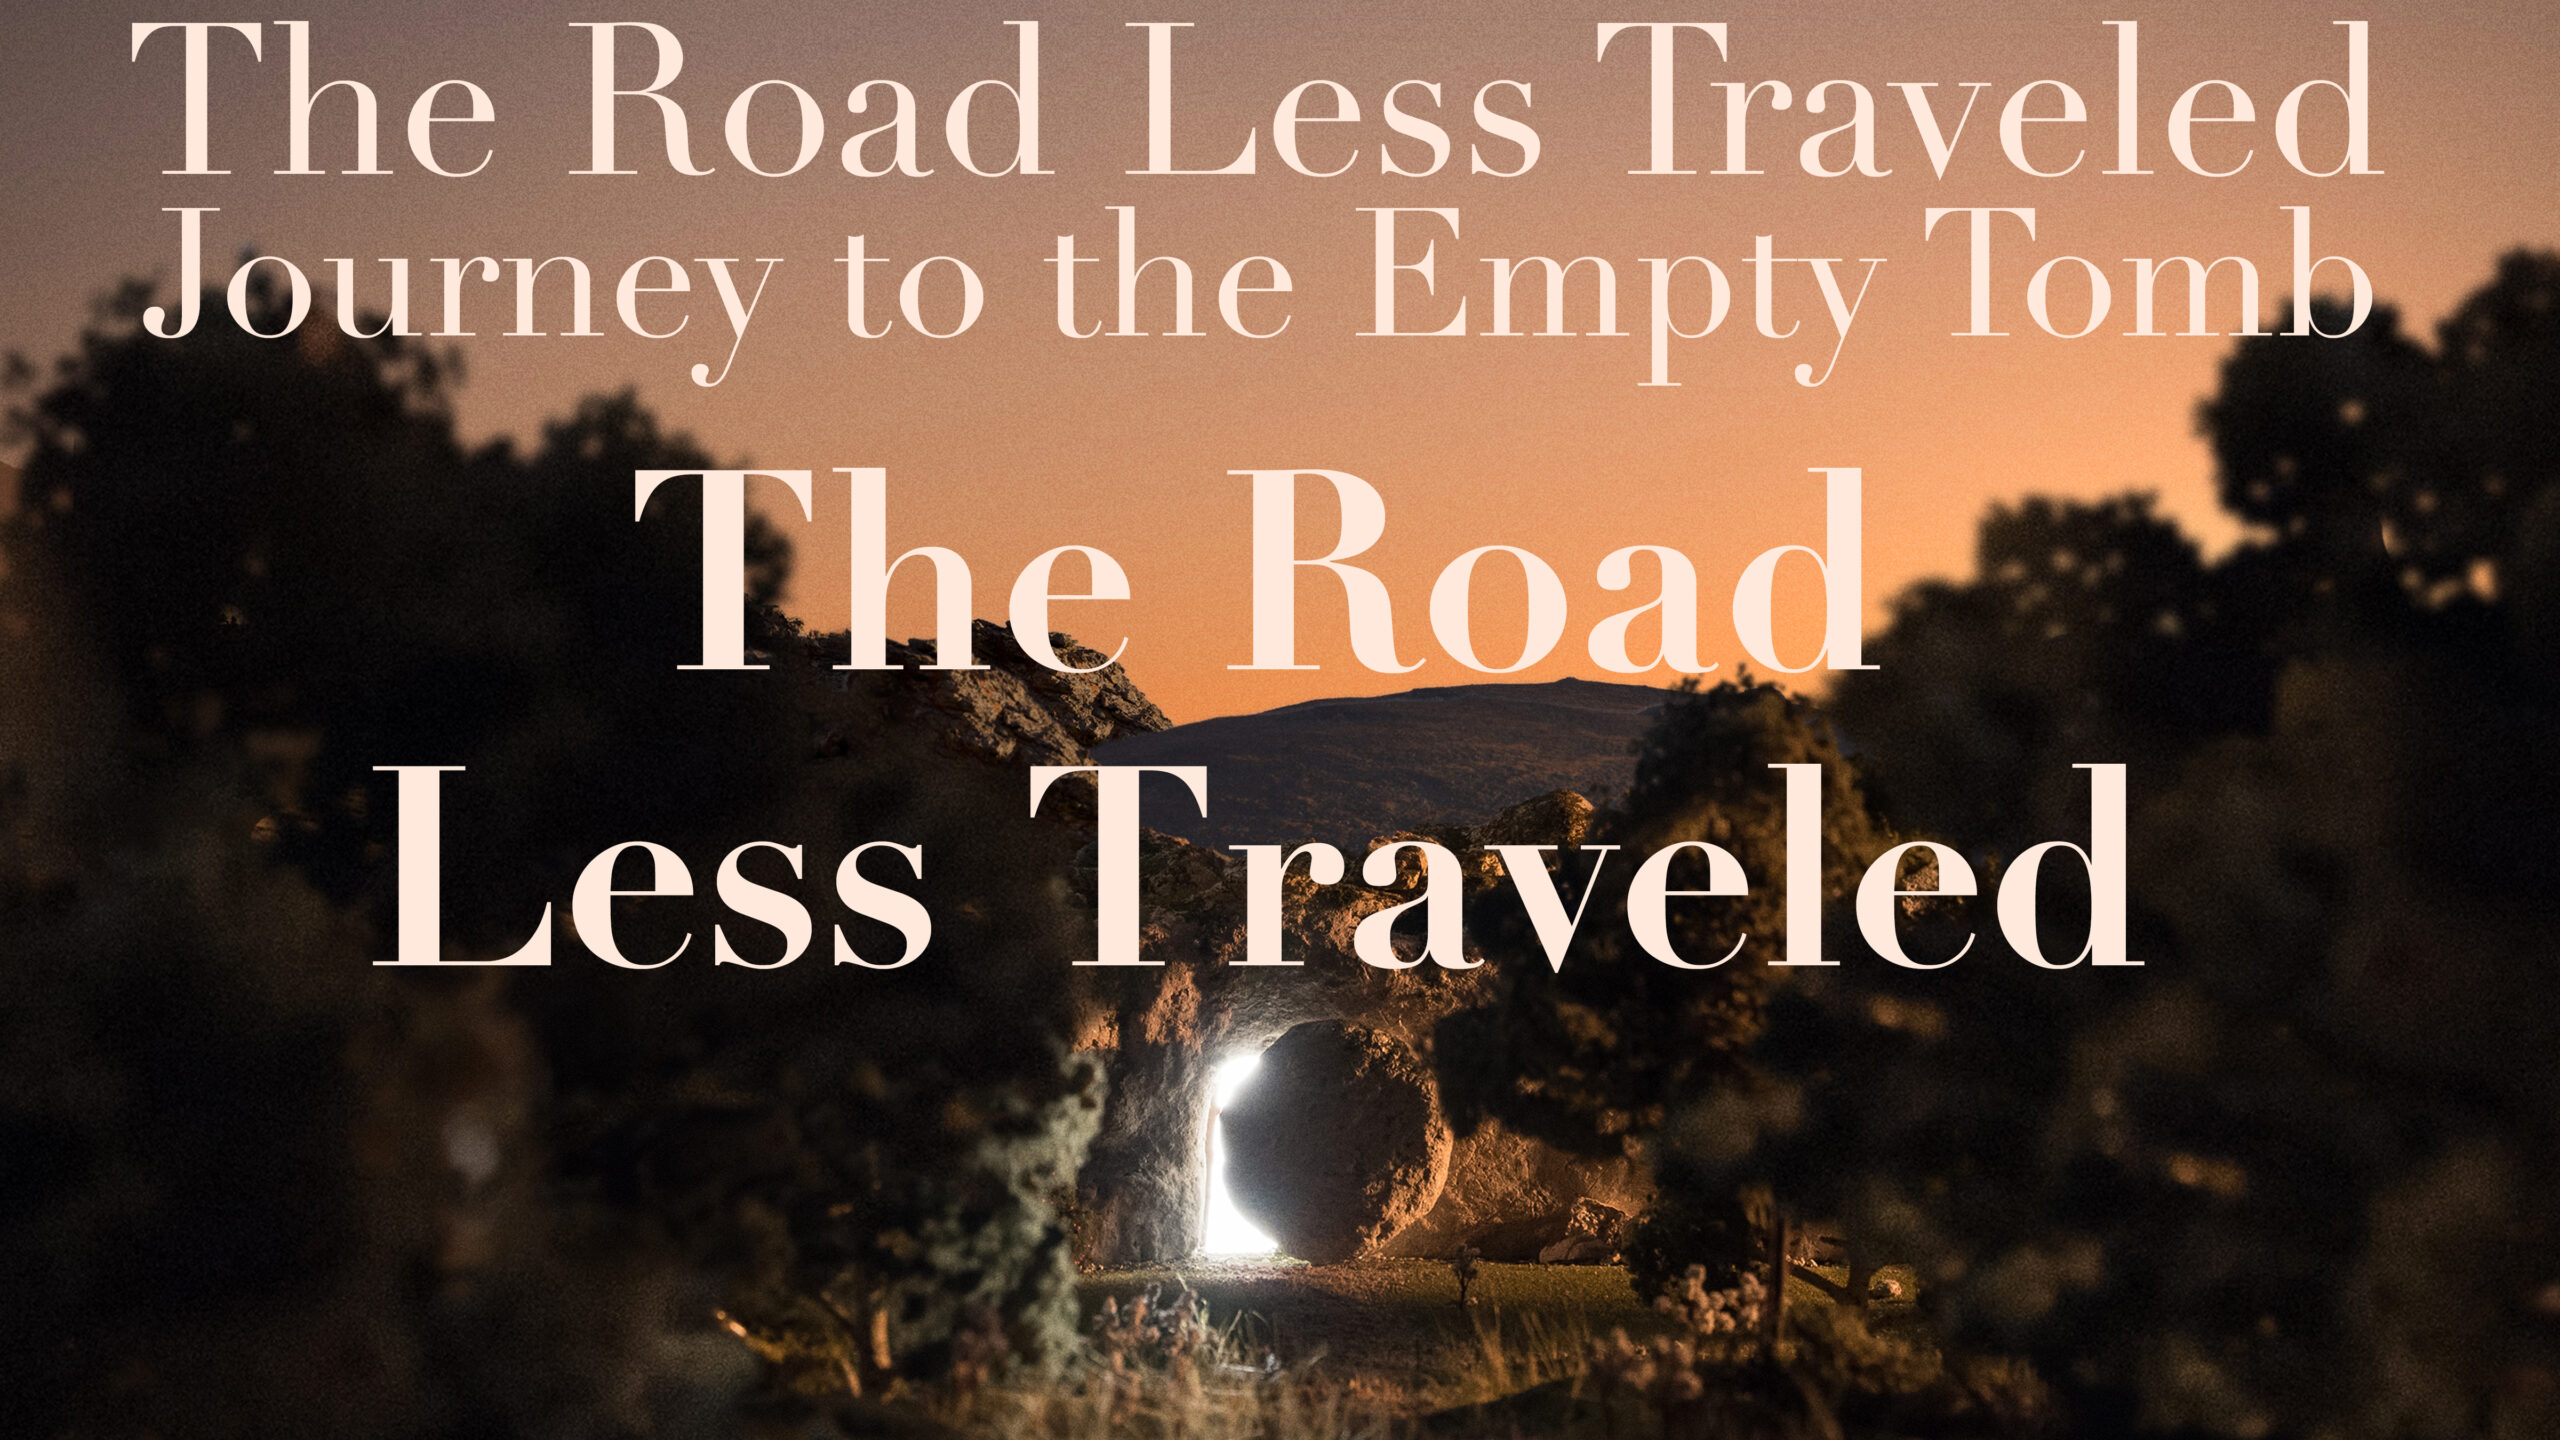 The Road Less Traveled - Journey to the Empty Tomb Part 3 "The Road Less Traveled" (THRIVE)